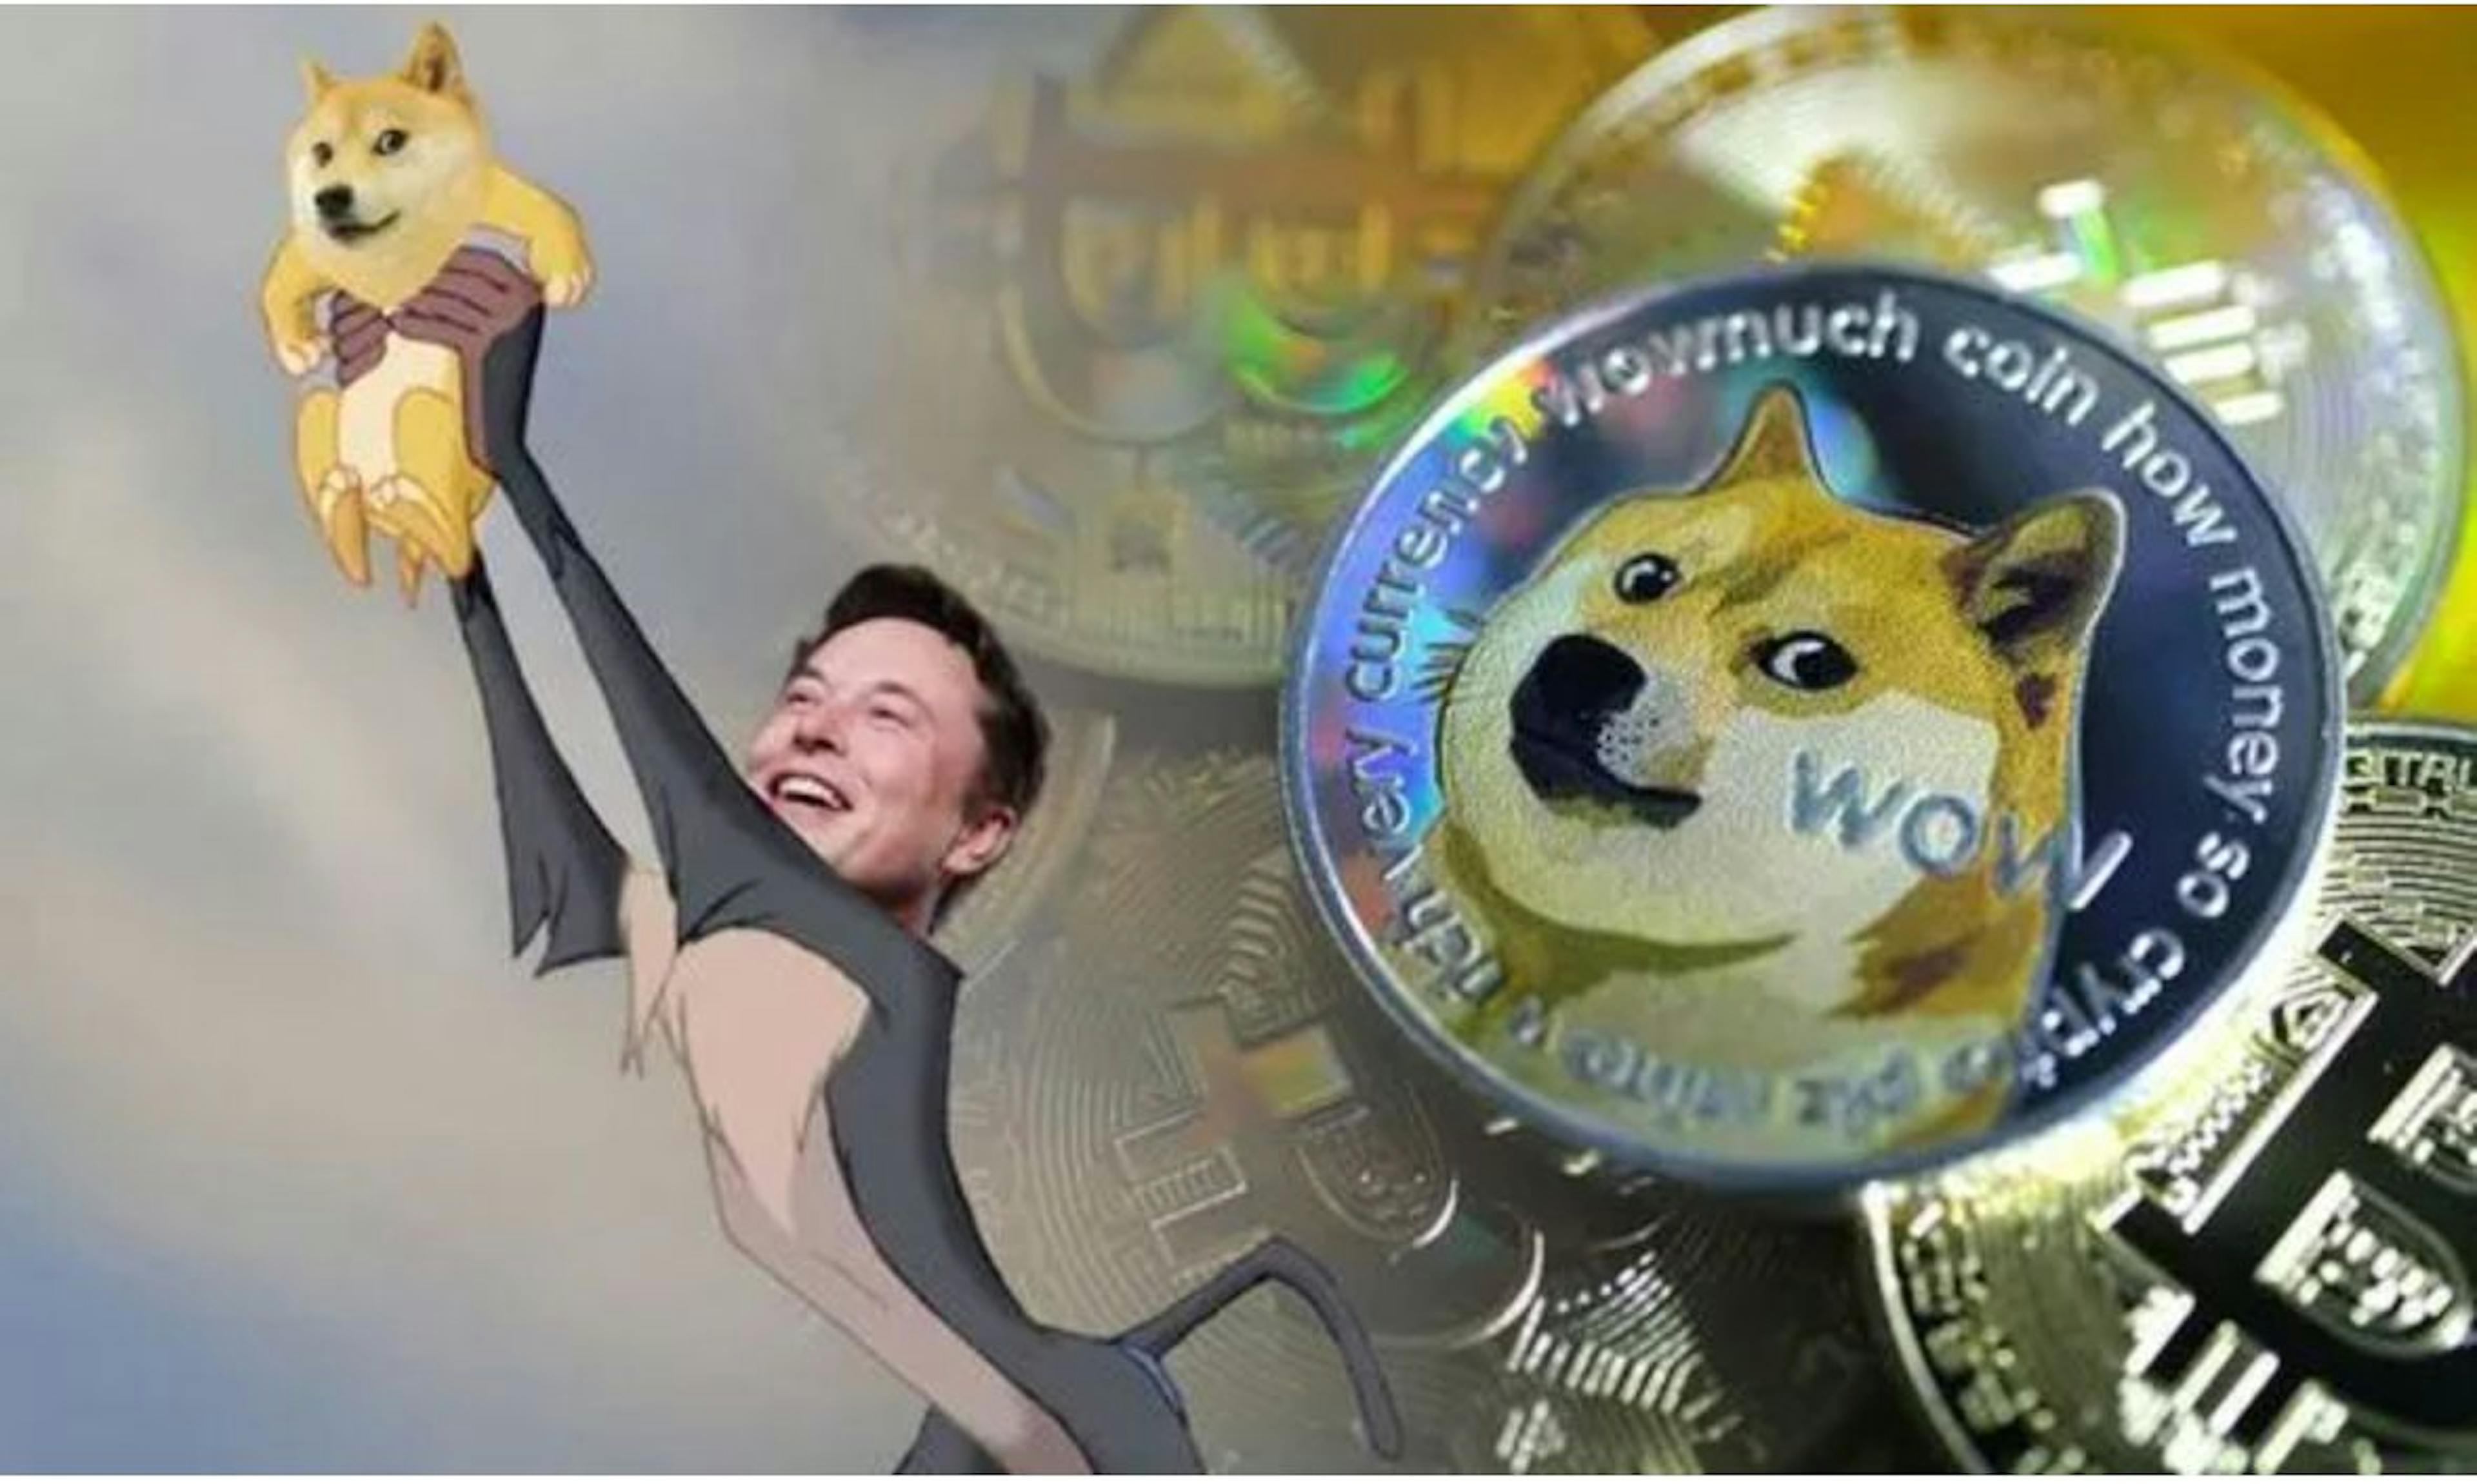 /elon-musk-and-crypto-markets-seriously-playing-or-playing-seriously-r5y35h6 feature image